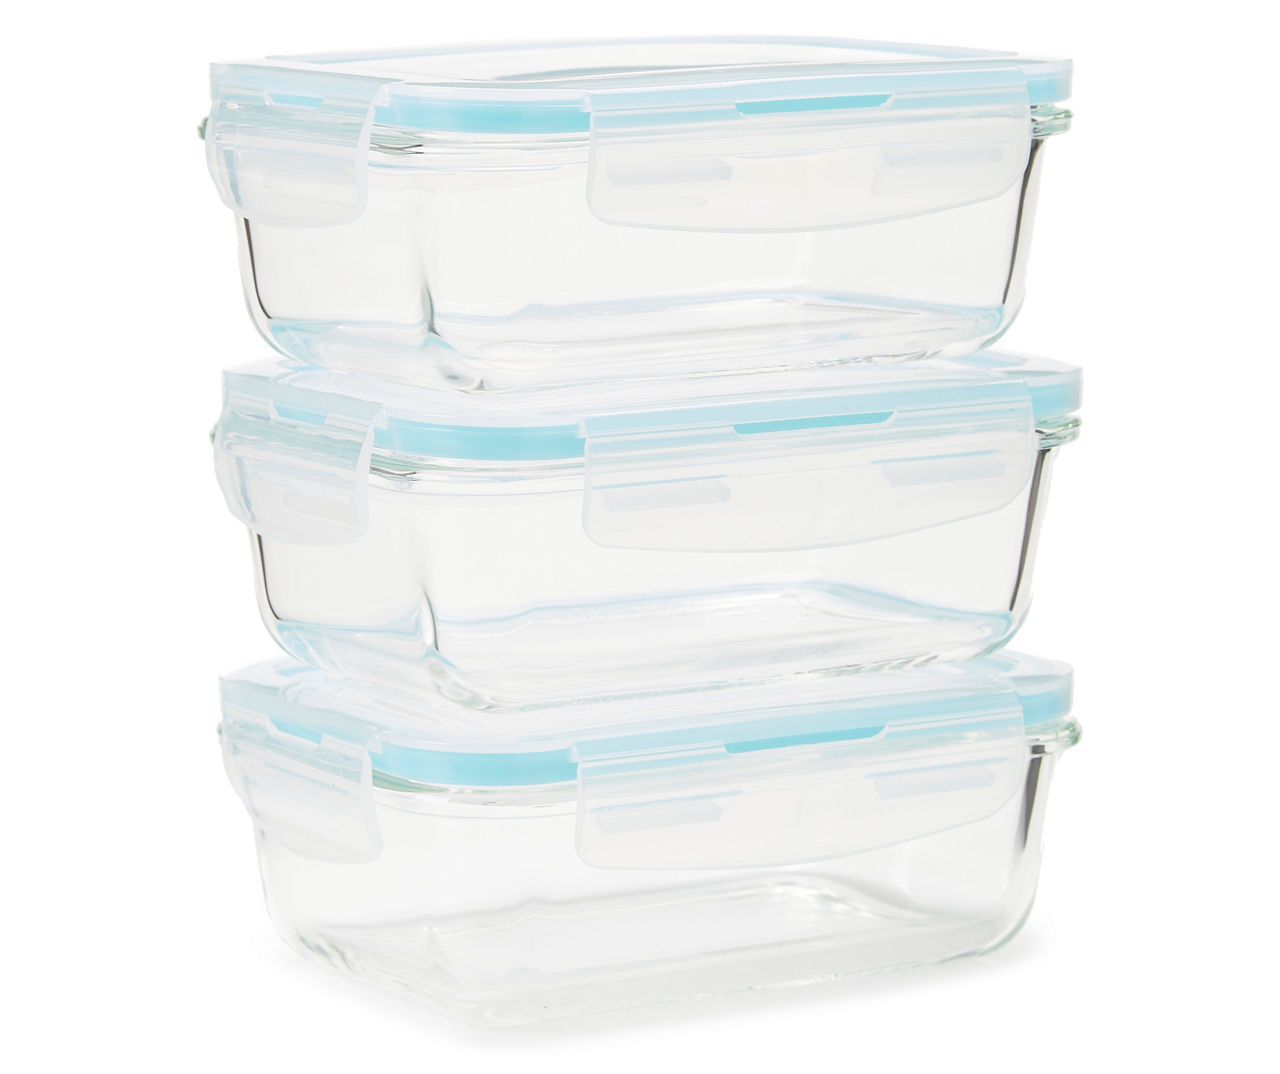 Snap & Lock Rectangle Container & Lid